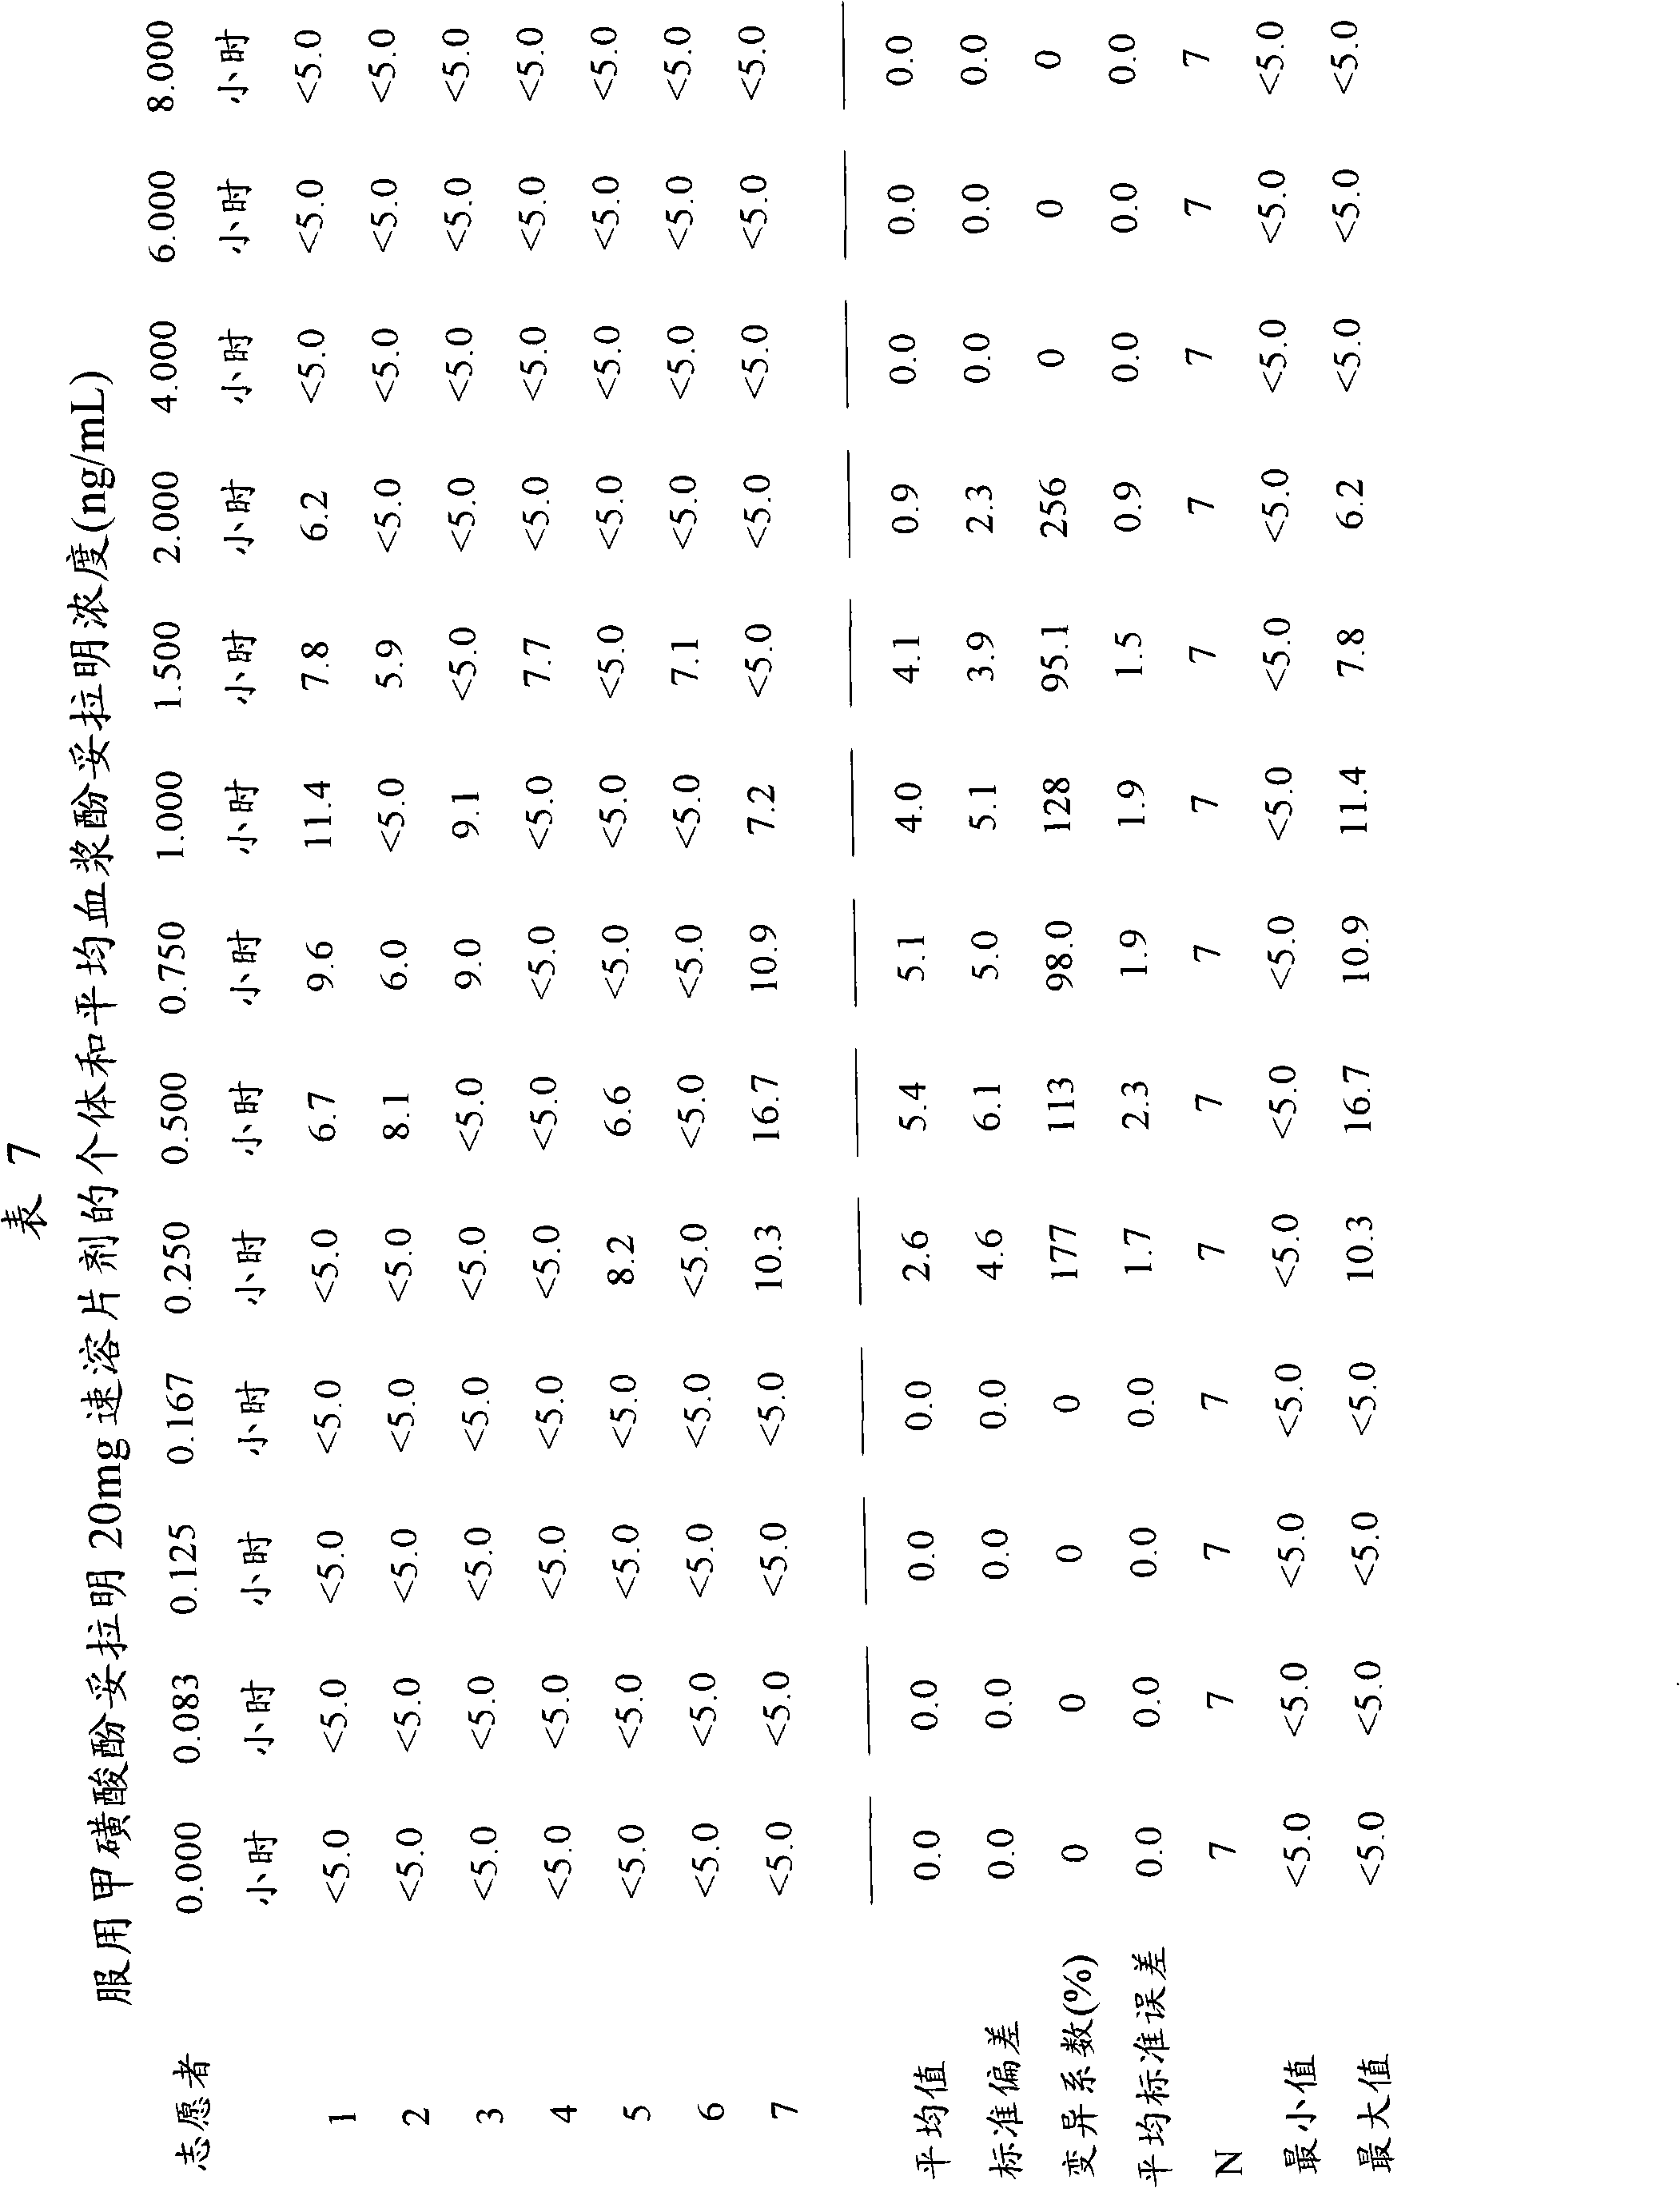 Methods and formulations for modulating the human sexual response